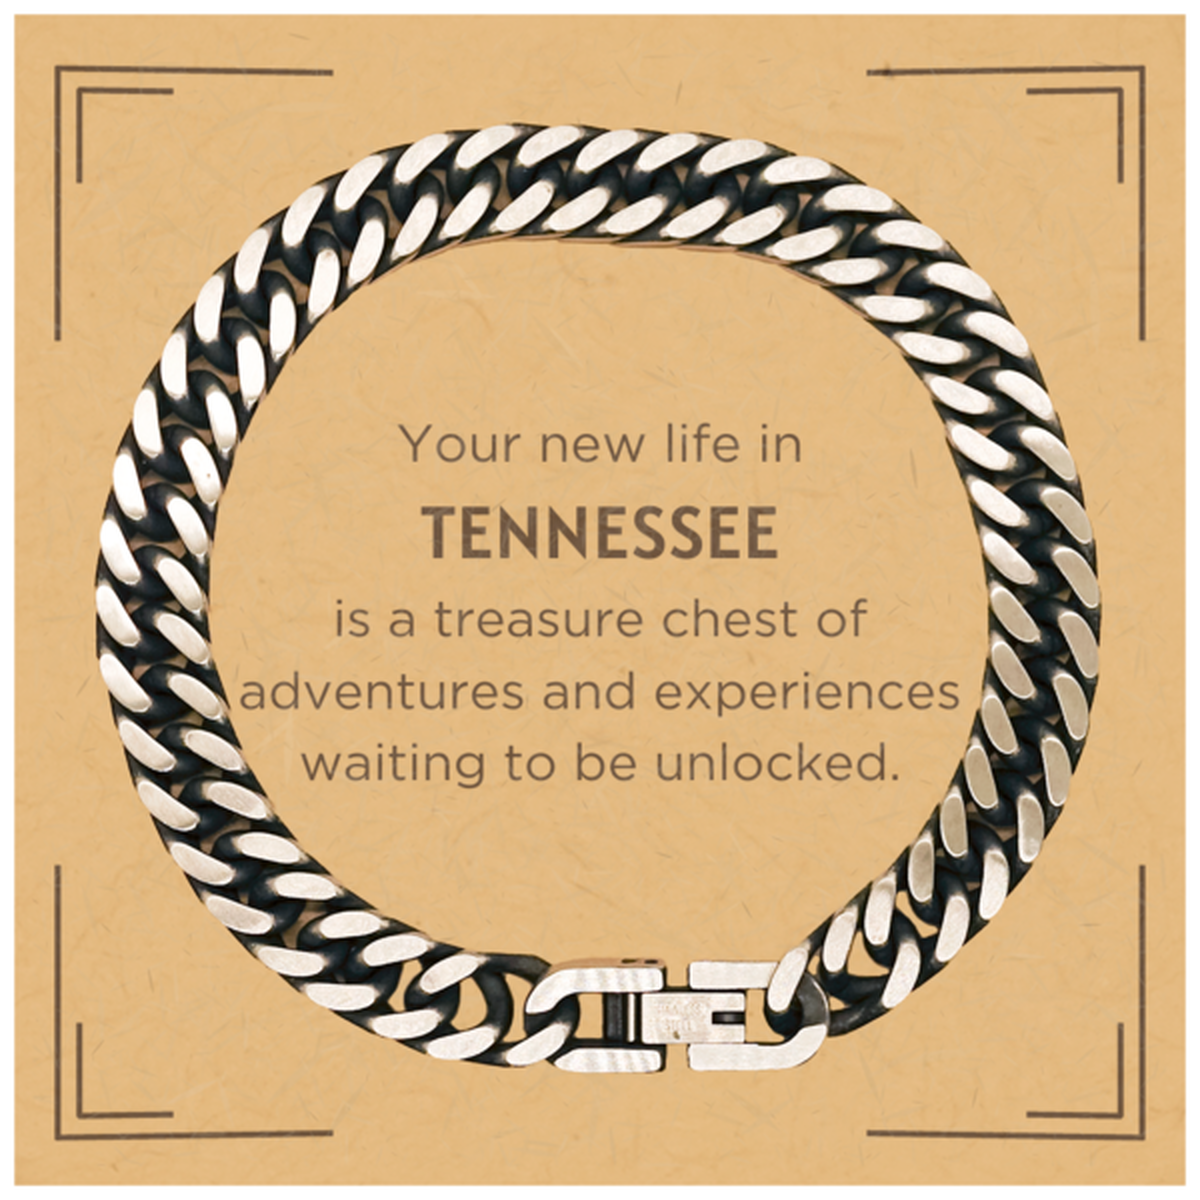 Moving to Tennessee Gifts, Your new life in Tennessee, Long Distance Tennessee Christmas Cuban Link Chain Bracelet For Men, Women, Friends, Coworkers